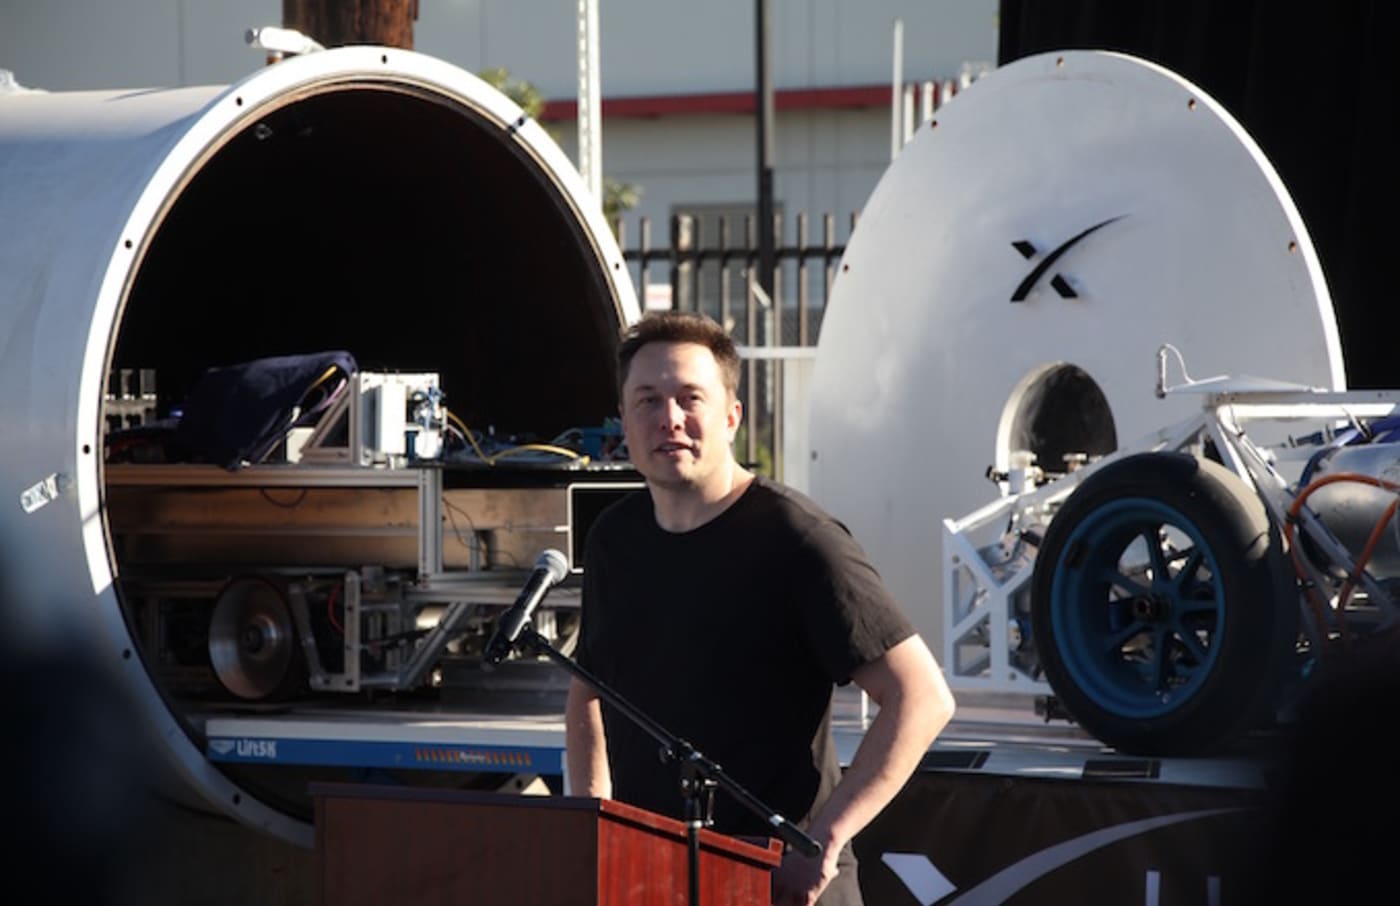 Elon Musk speaks at the Hyperloop pod competition.